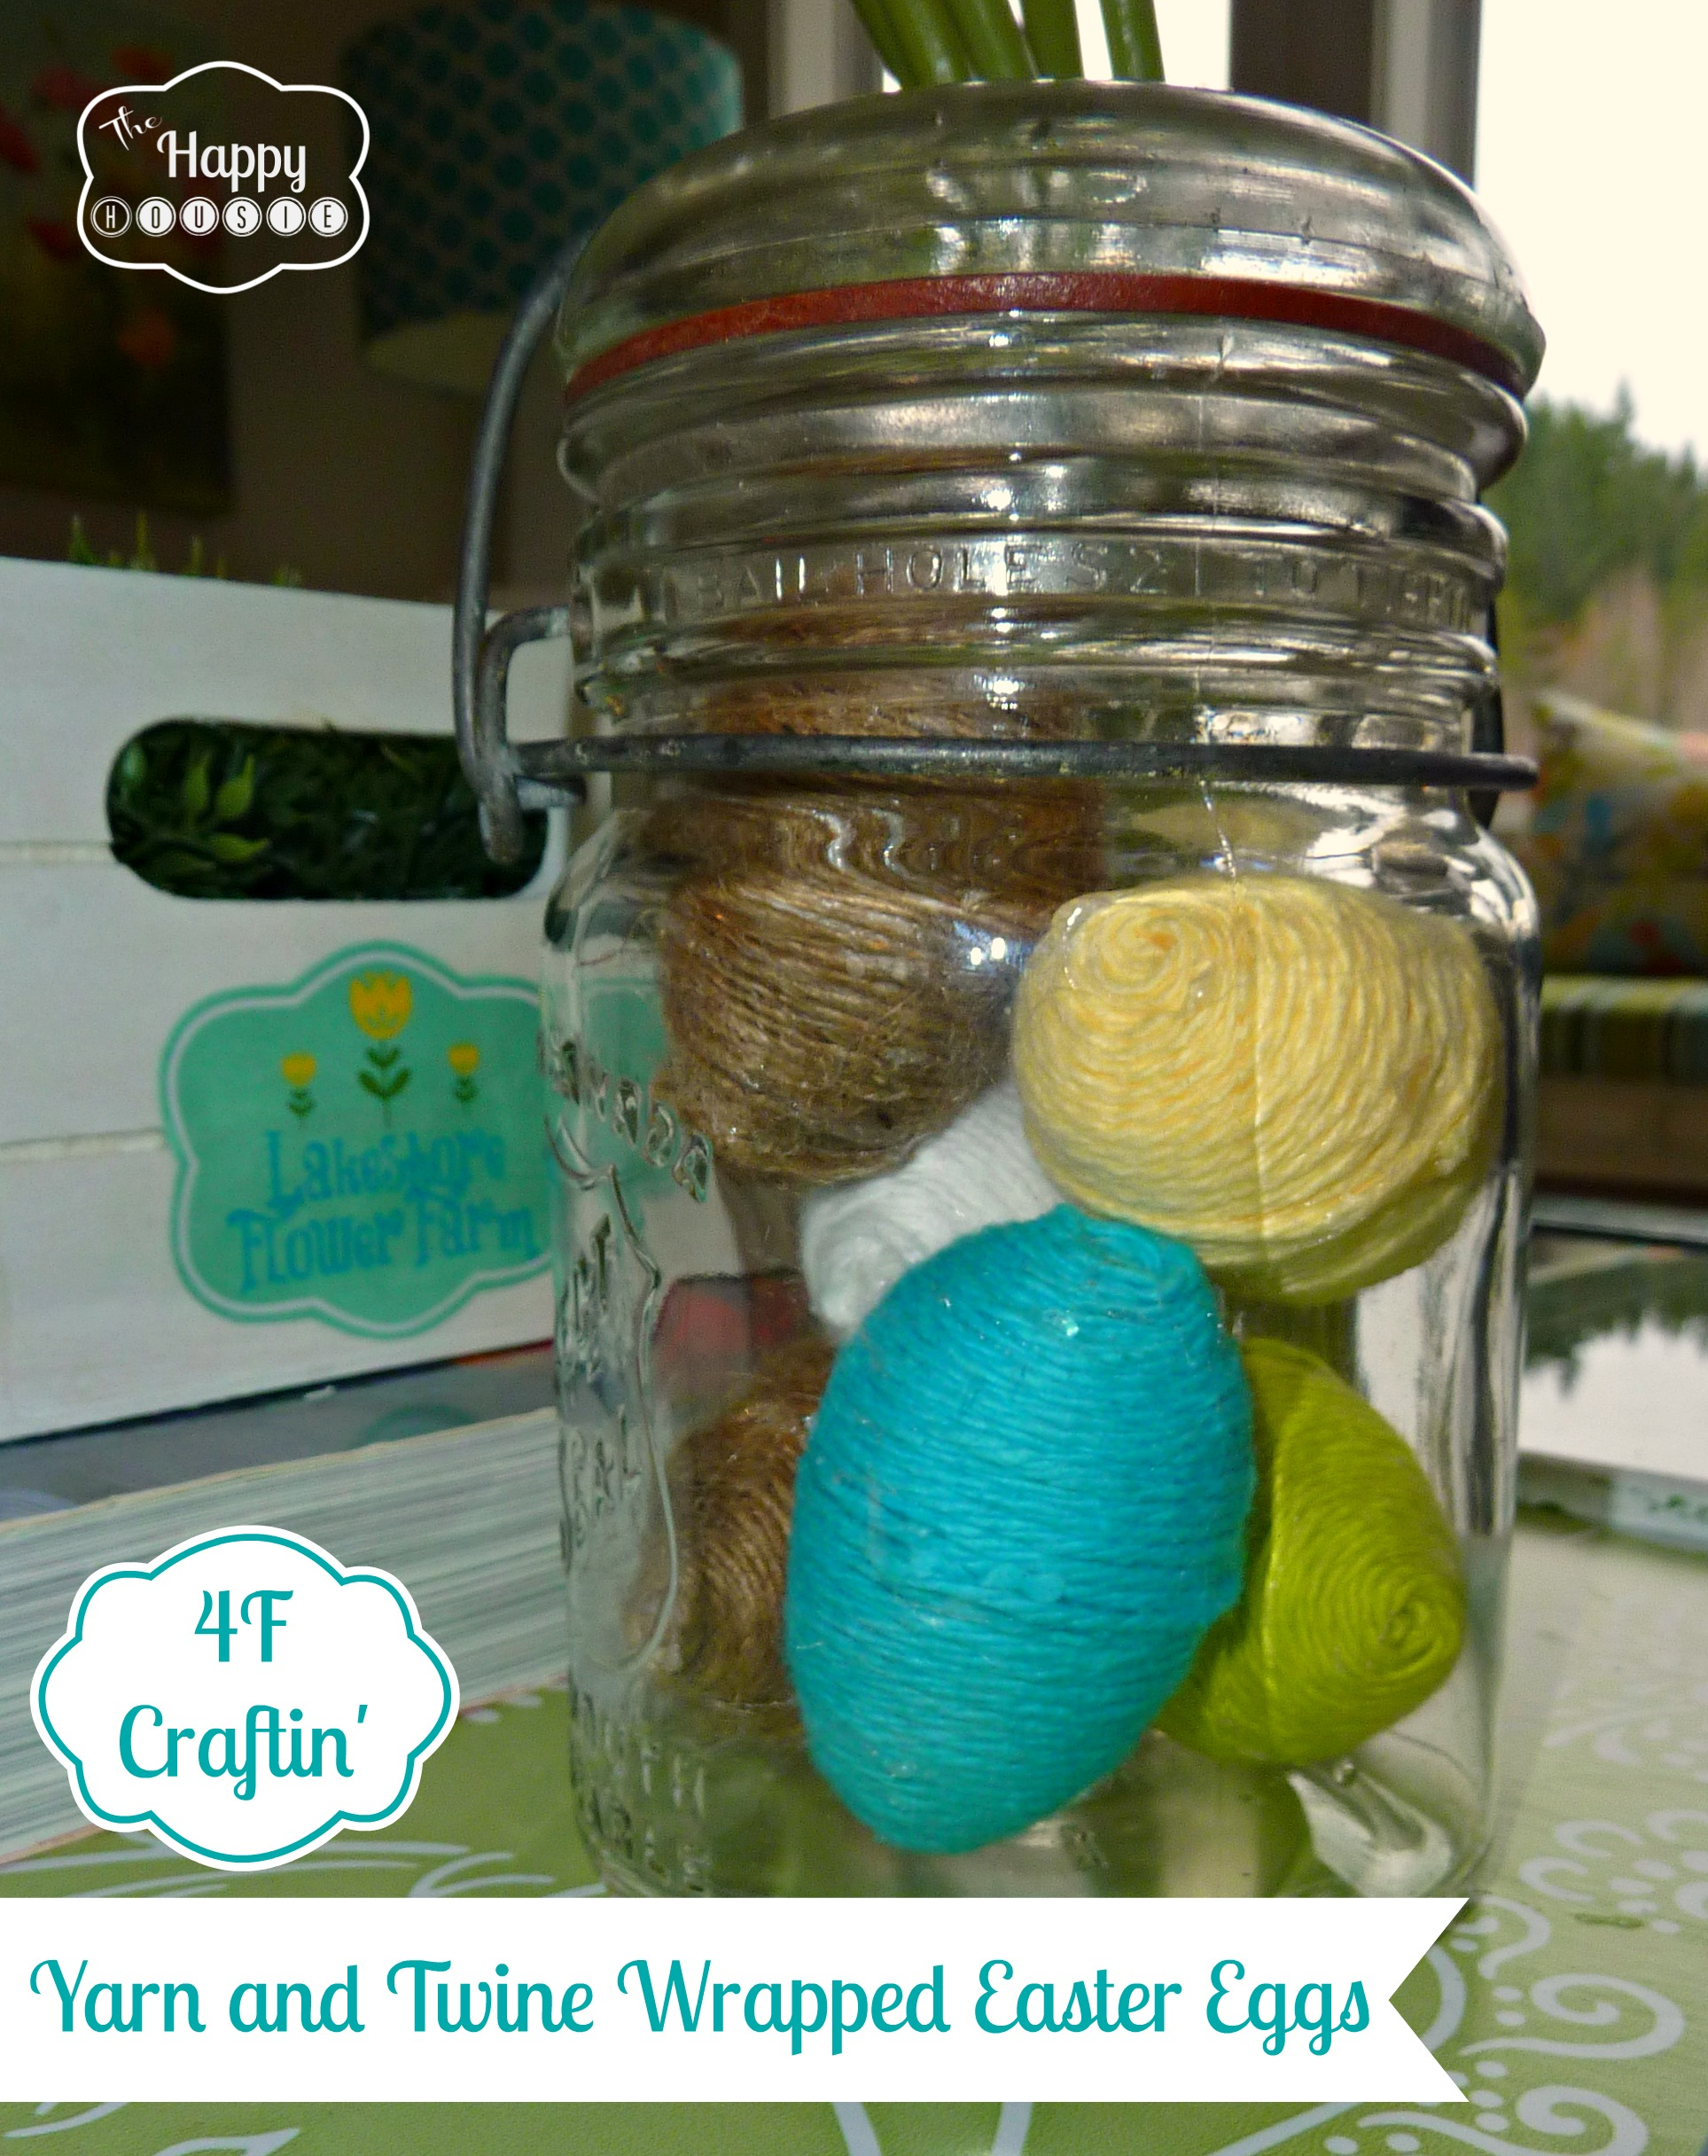 Turquoise, yellow and green wrapped Easter eggs in a glass jar.